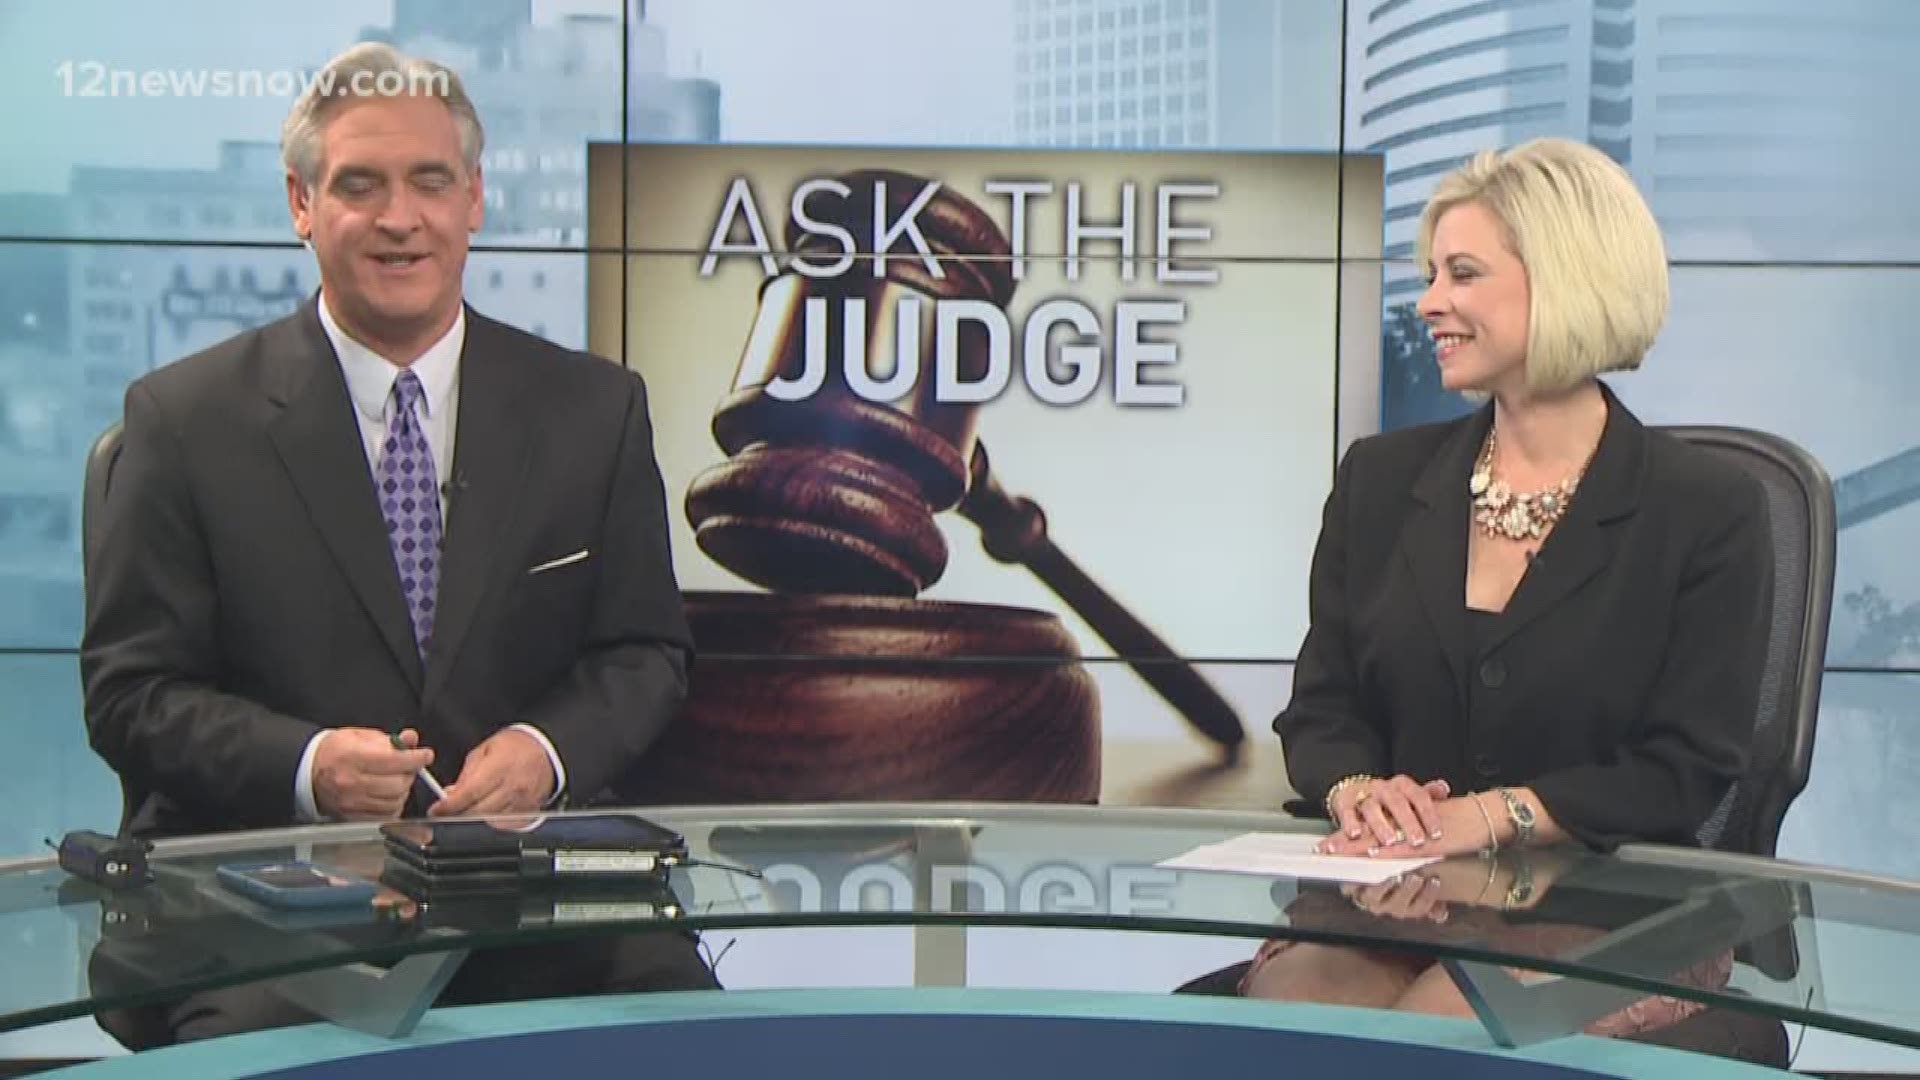 Judge Courtney Arkeen answers viewer questions about child custody, gift-giving, and child support